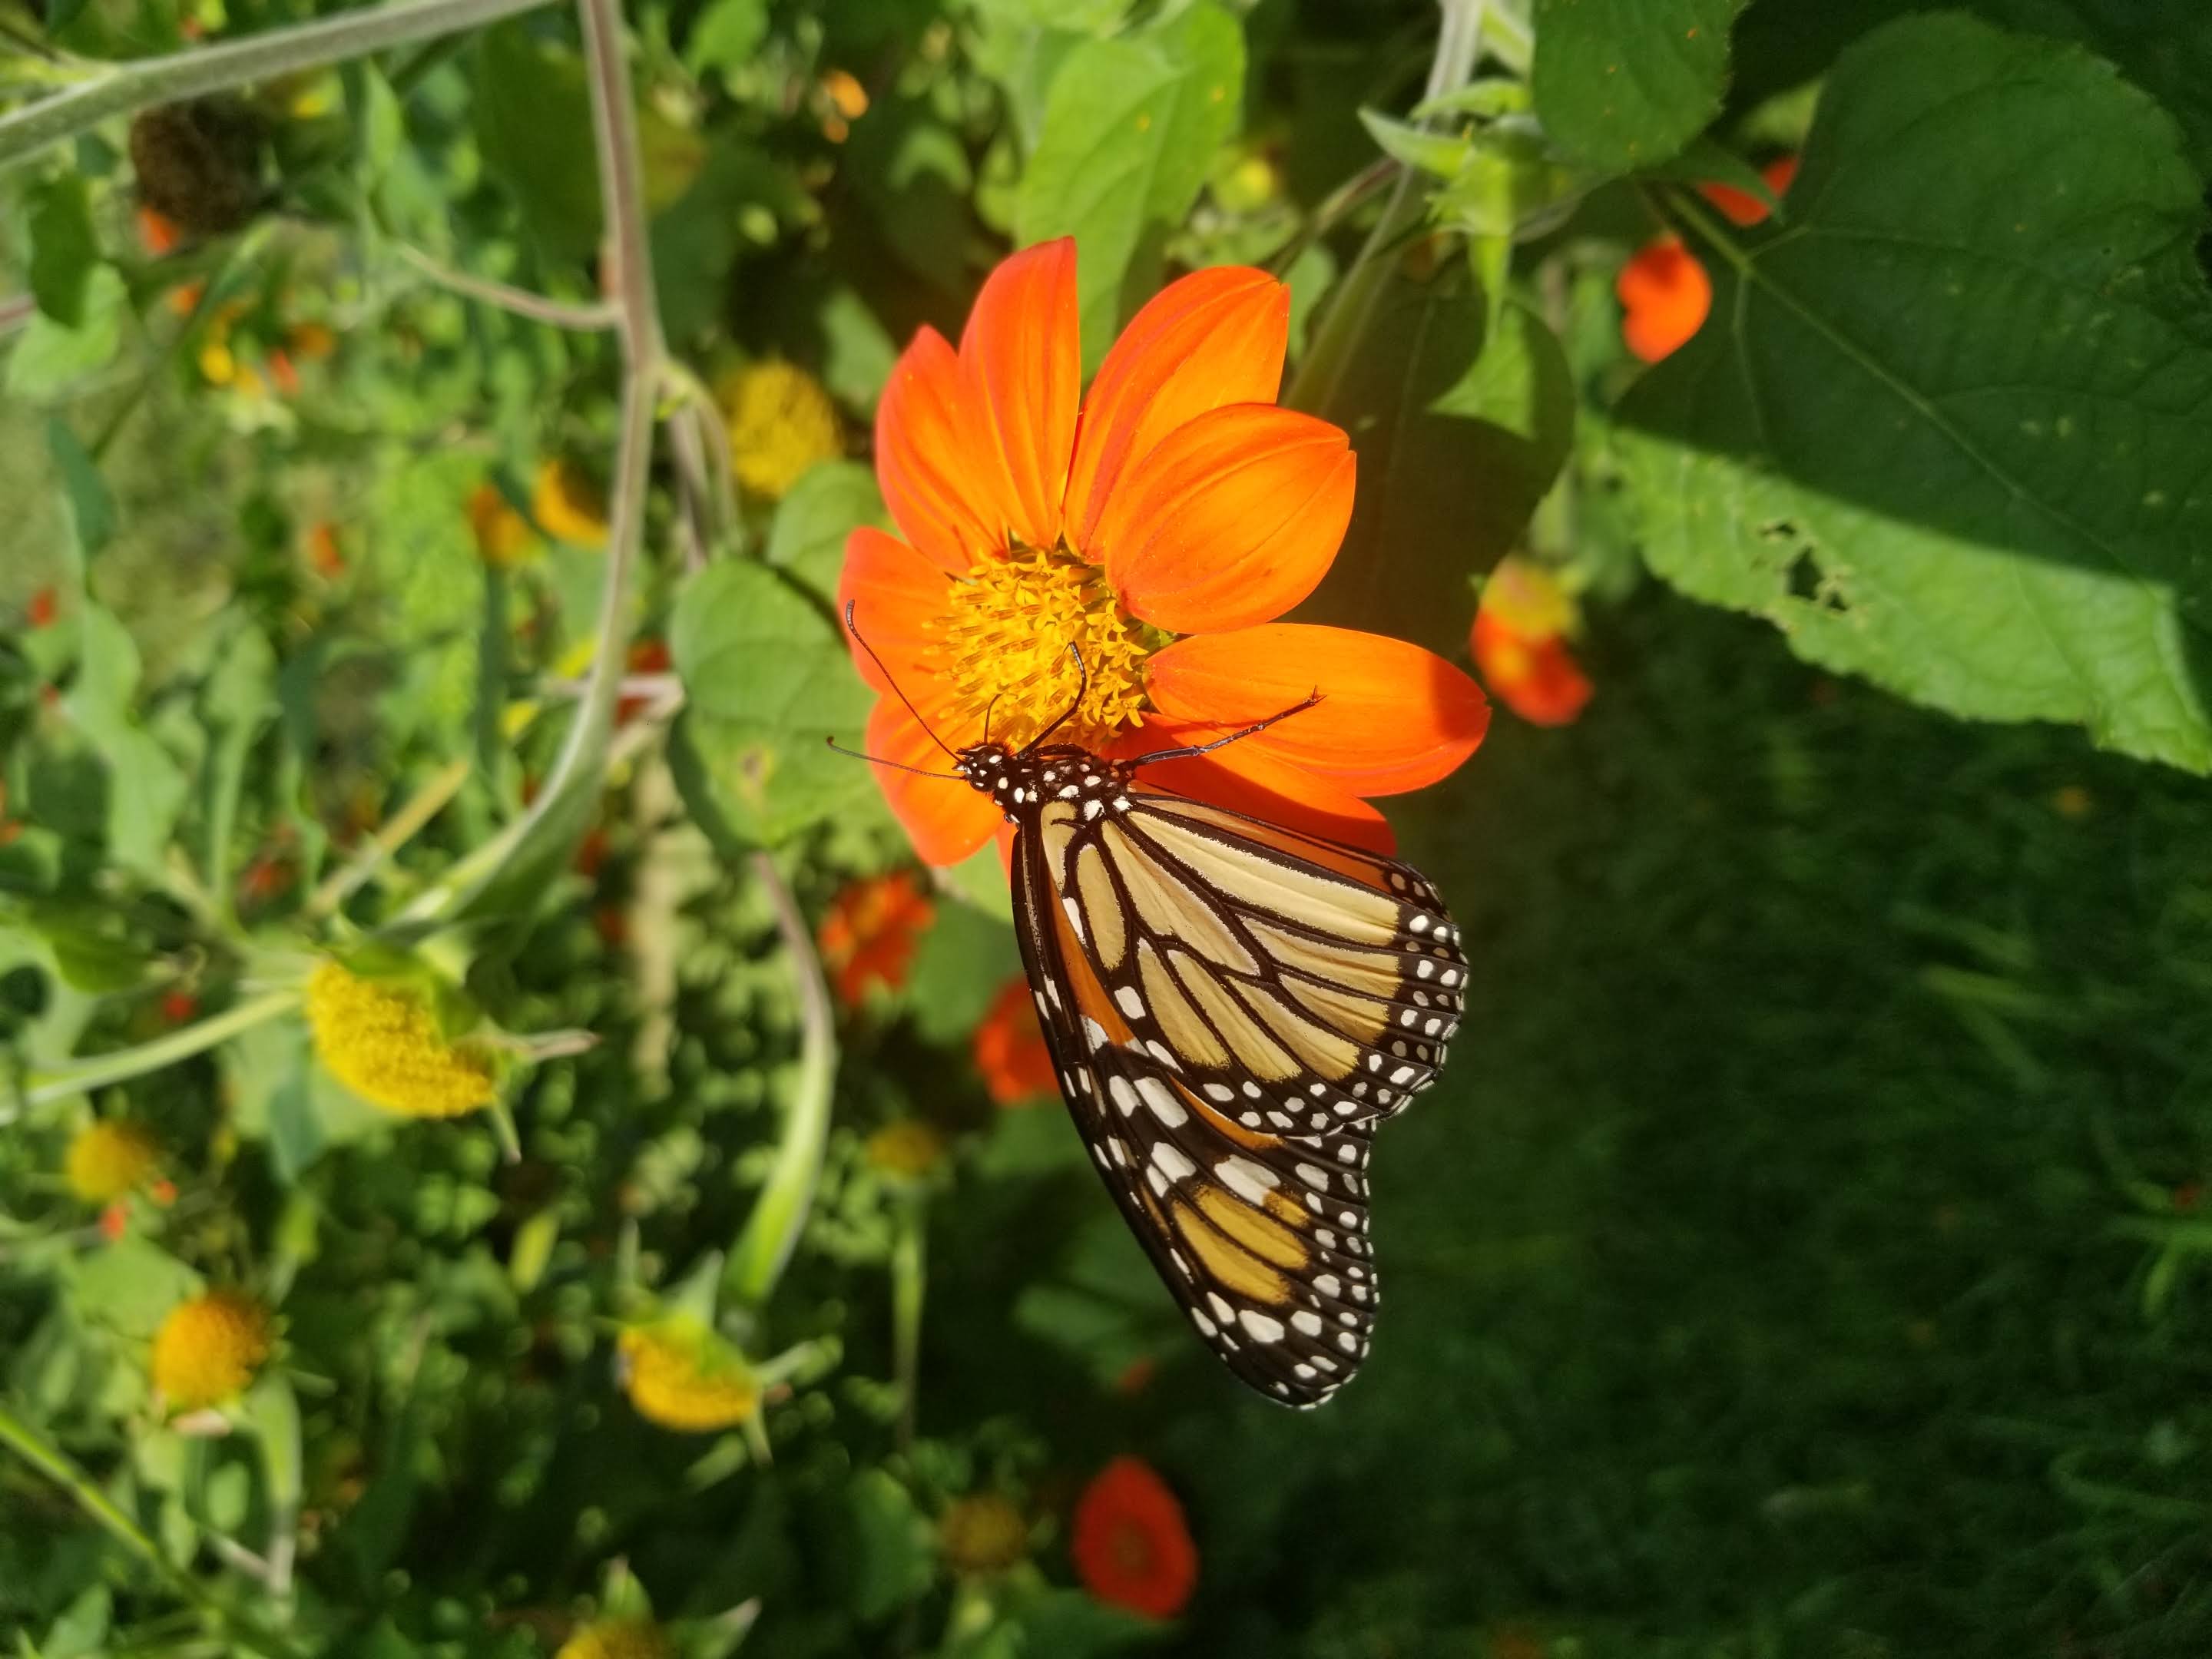 Butterfly on Mexican sunflower